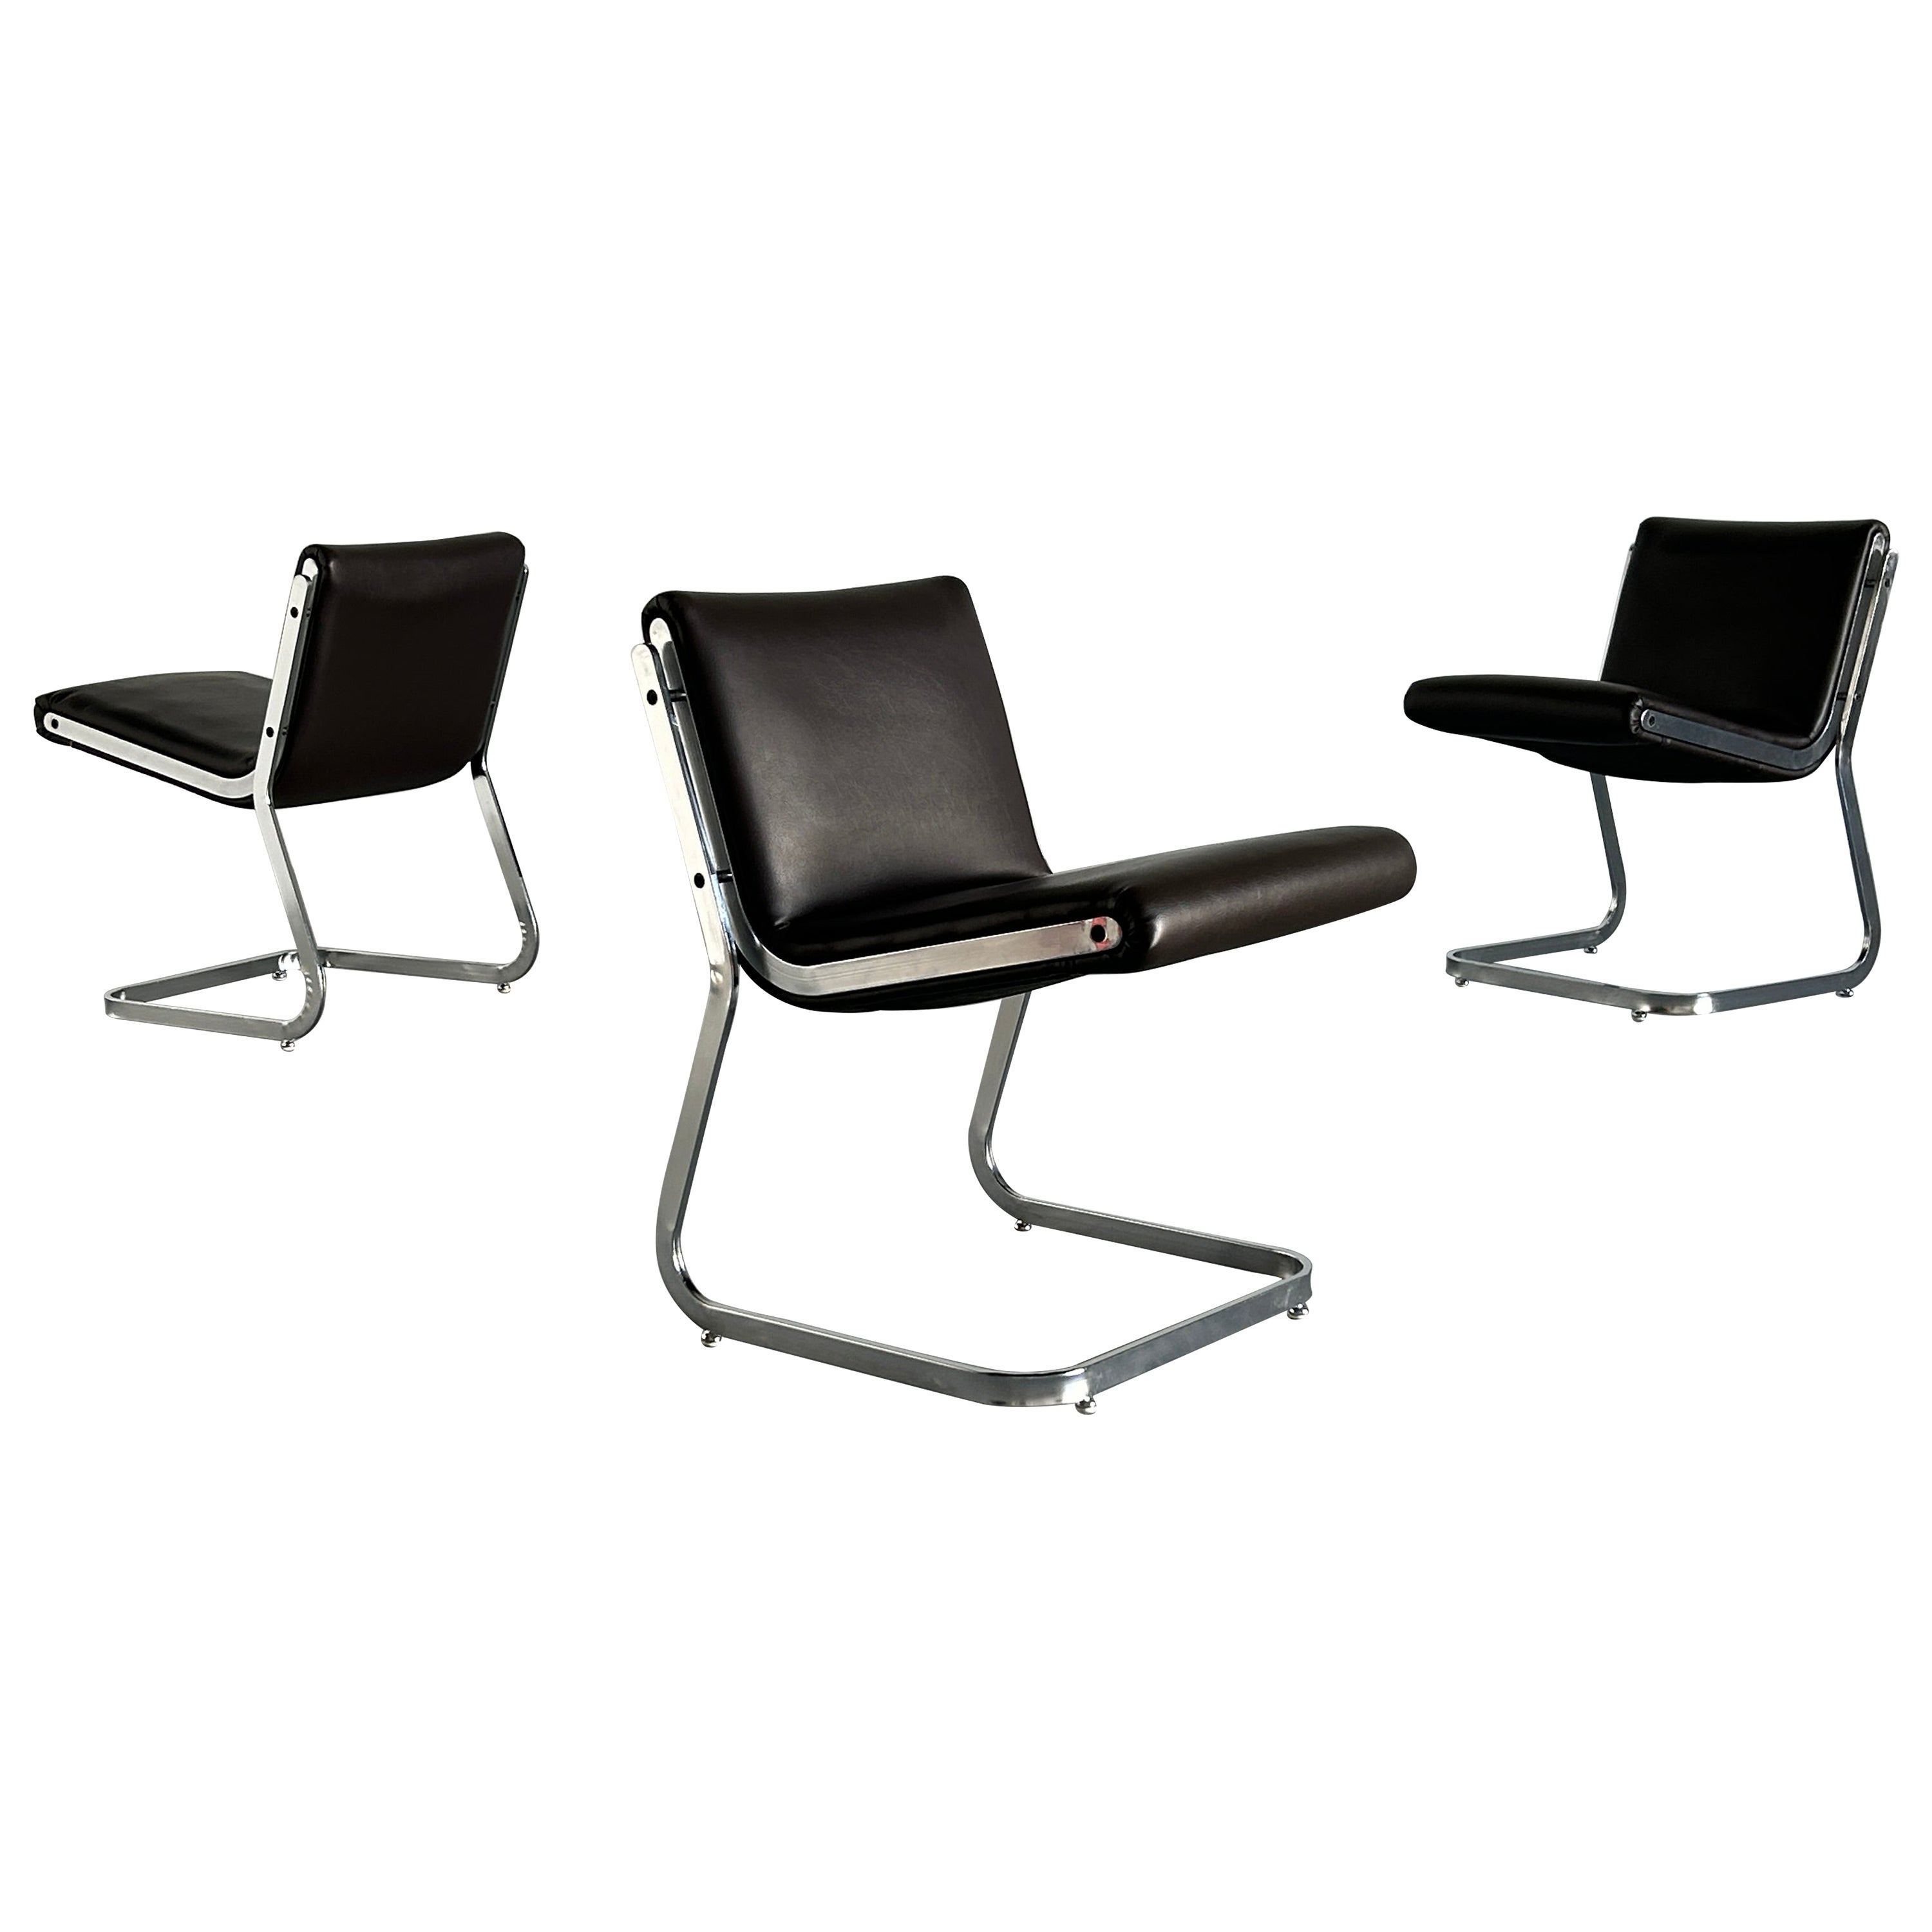 1 of 3 Italian Space Age Cantilever Lounge Chairs in Steel and Faux Leather, 70s For Sale